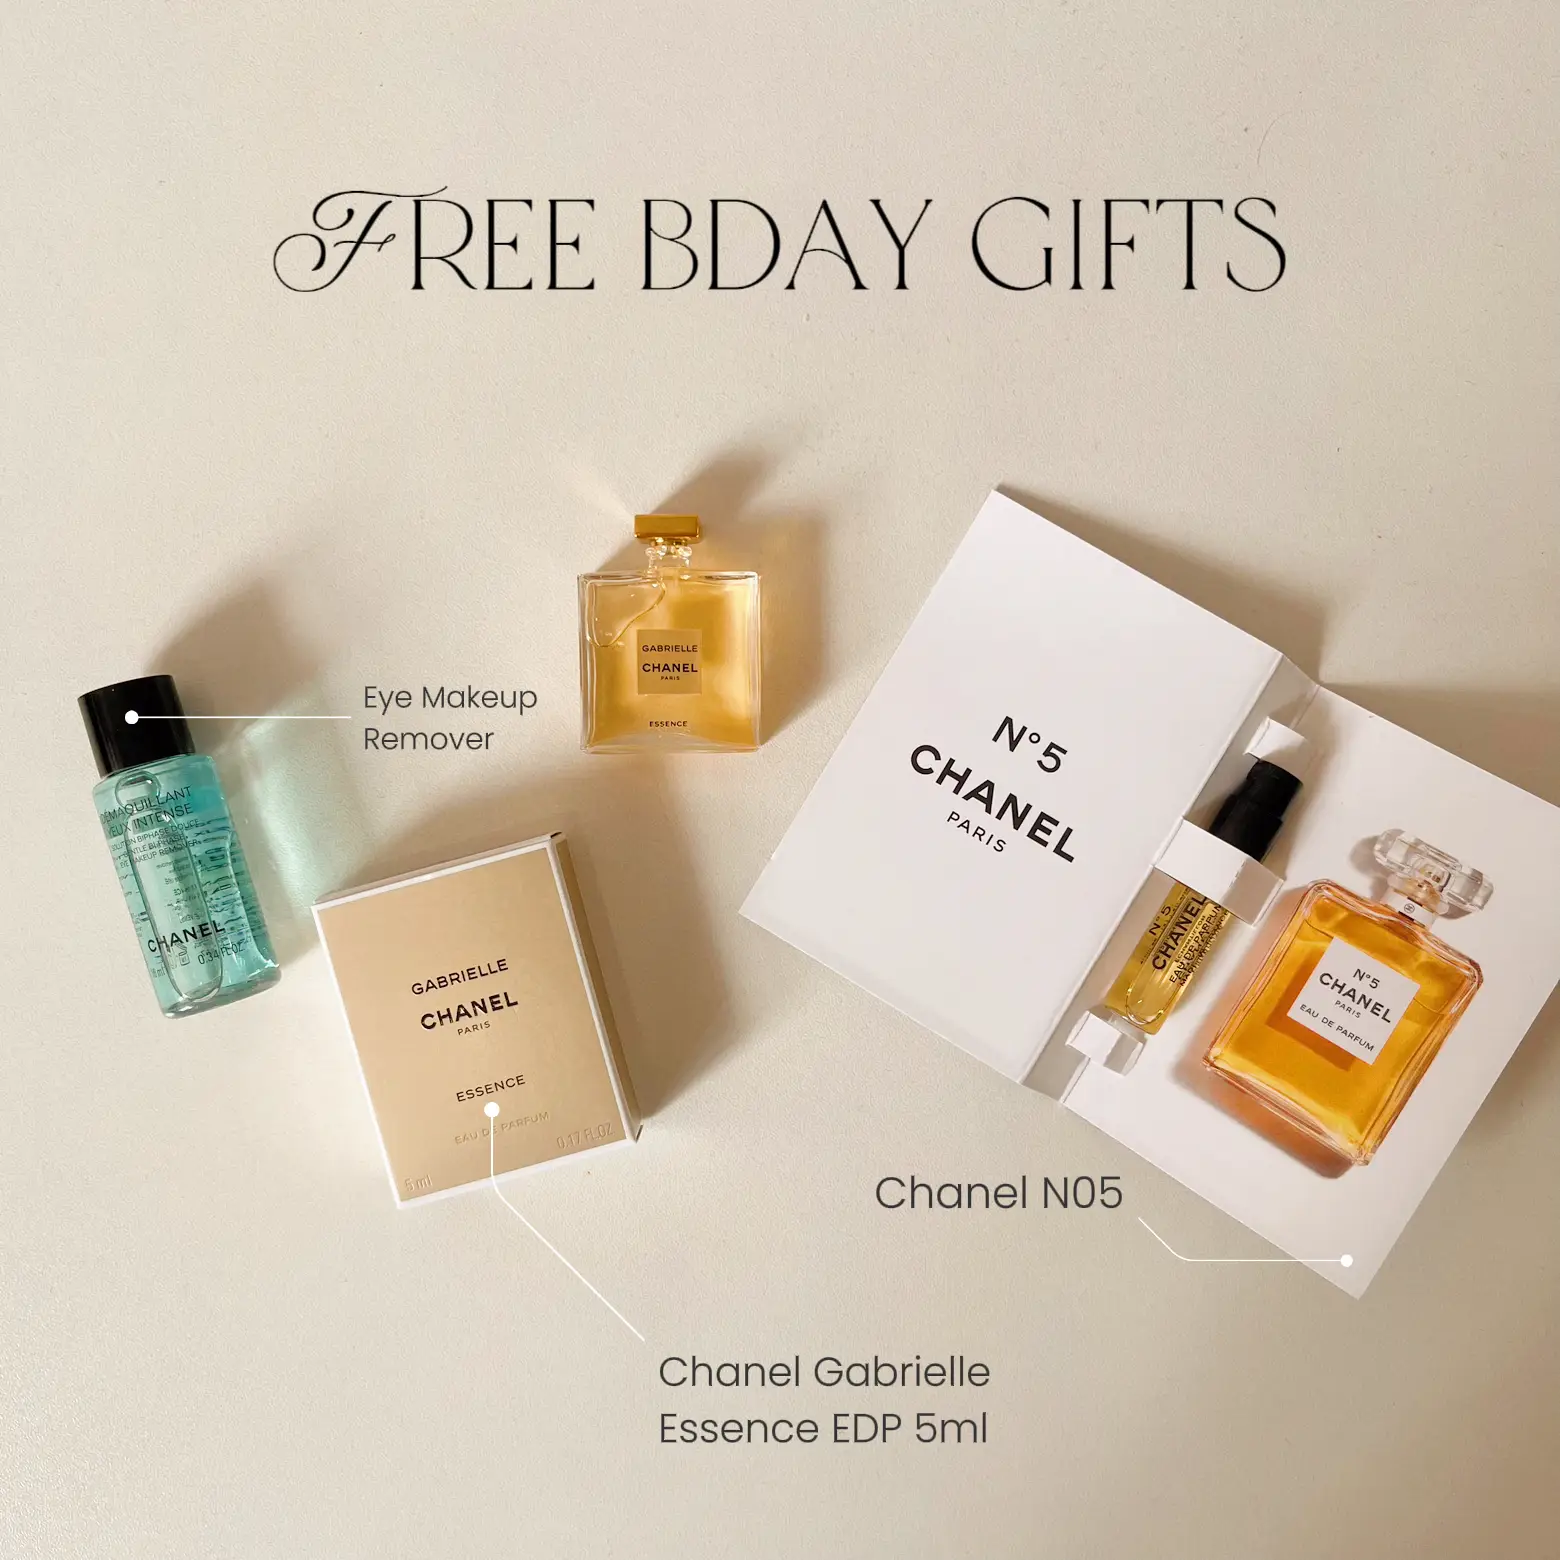 ✨ Sharing an Exclusive Birthday Gift from CHANEL!, Gallery posted by Julia  Lai